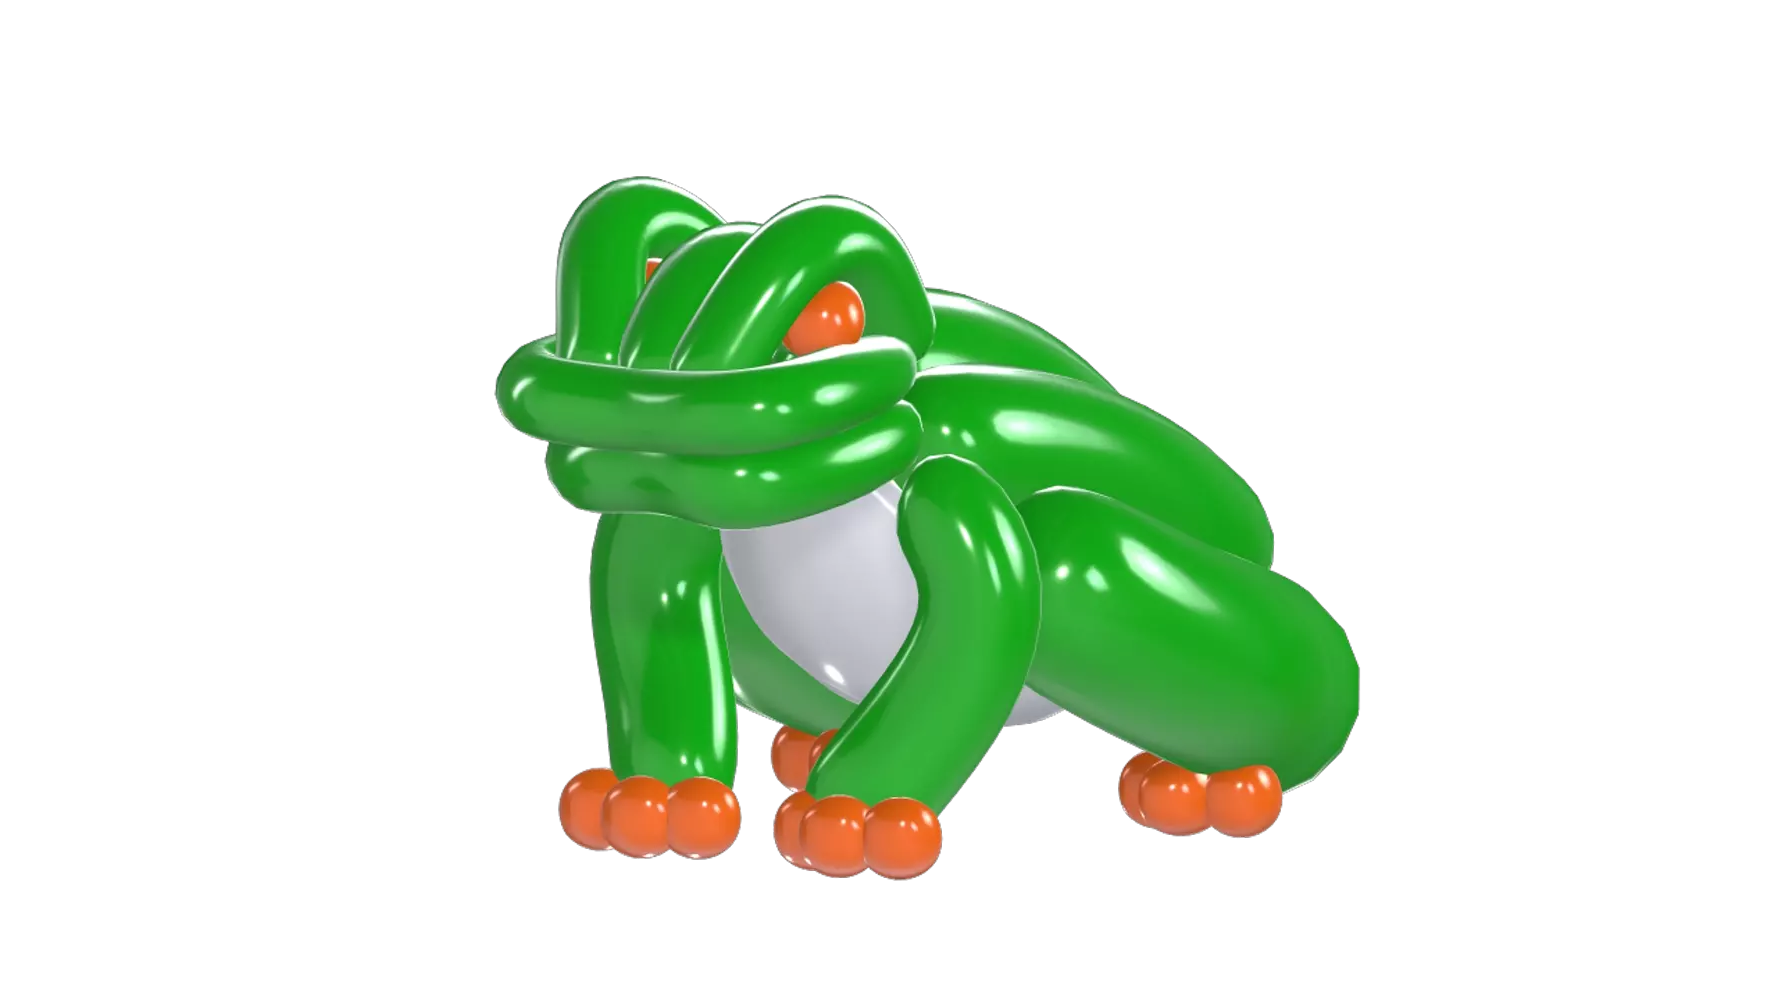 Frog Balloon 3D Graphic